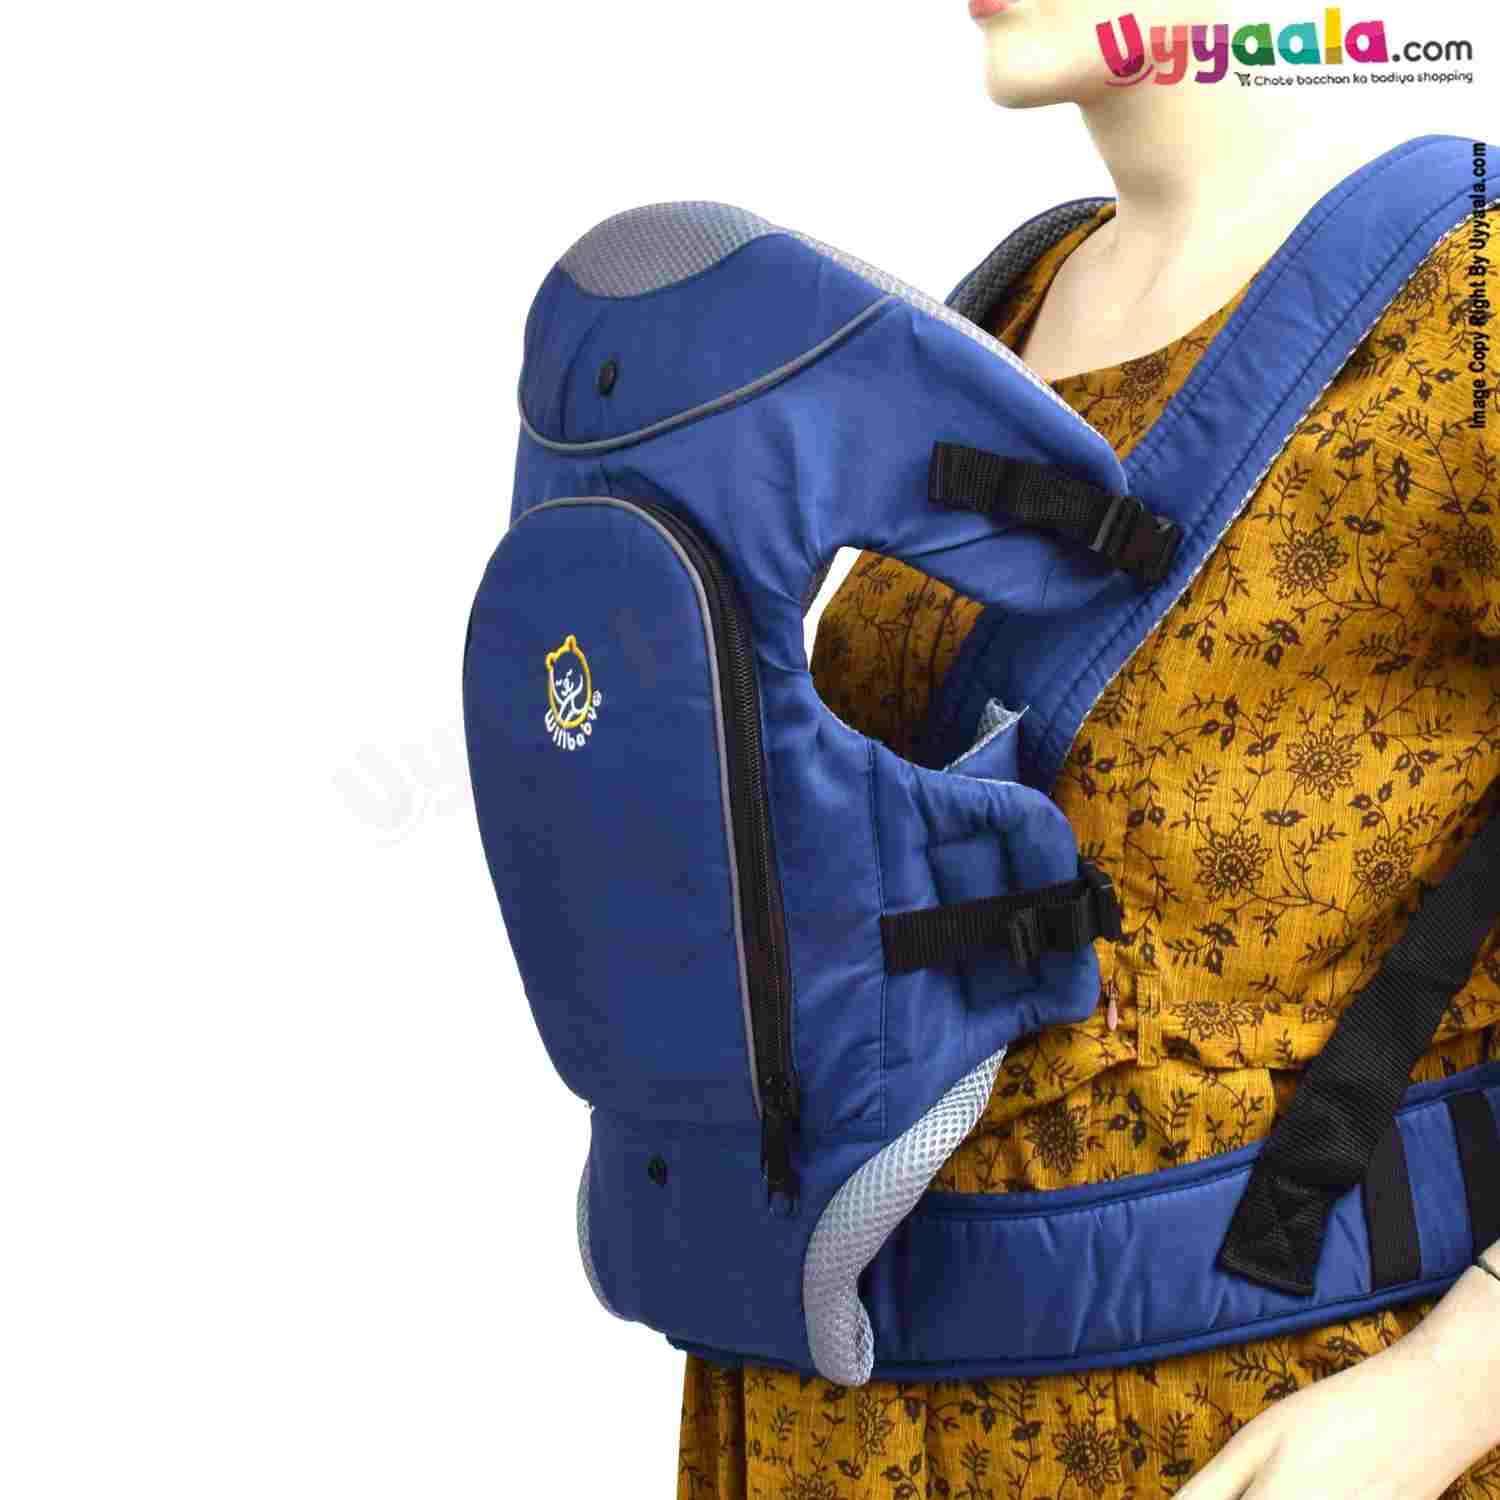 WILL BABY Baby Carrier with 2in 1 Carry Positions, for 3 to 12m Baby, Max Weight Up to 11kgs, Size(35*21cm) - Navy Blue